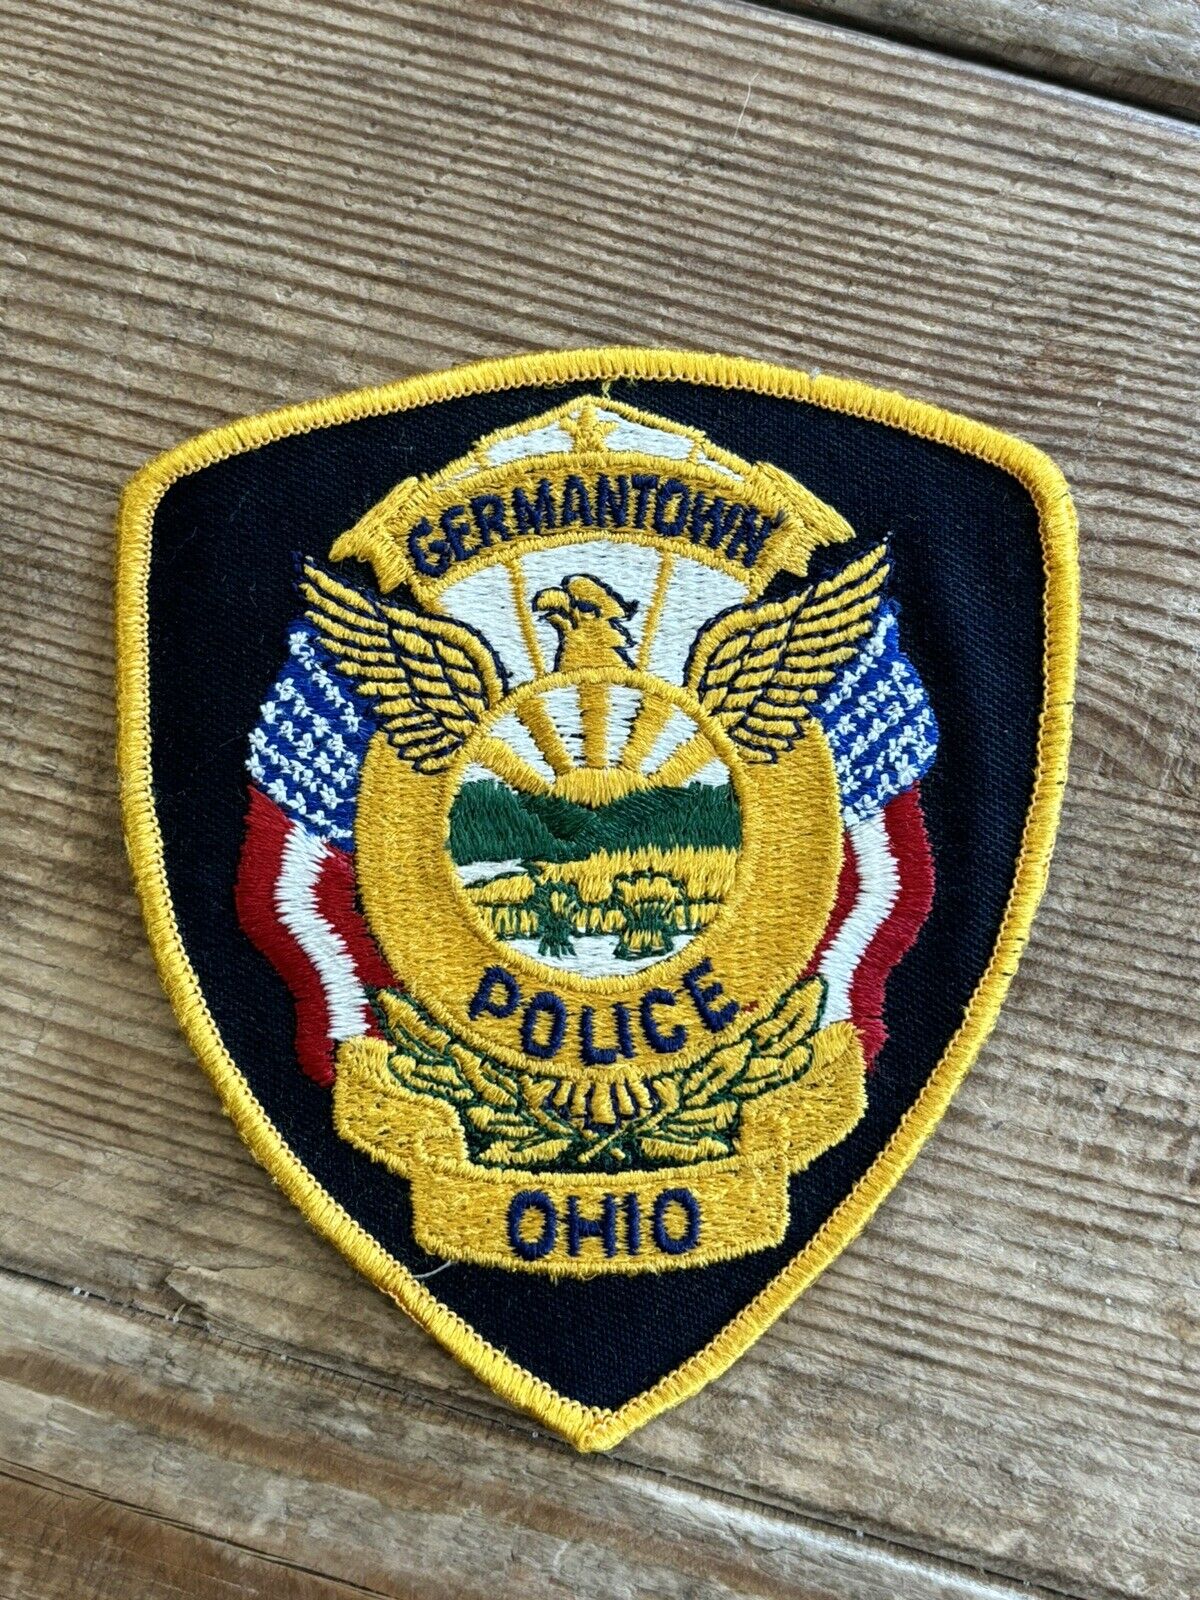 Germantown Ohio OH Police Shoulder Patch New 